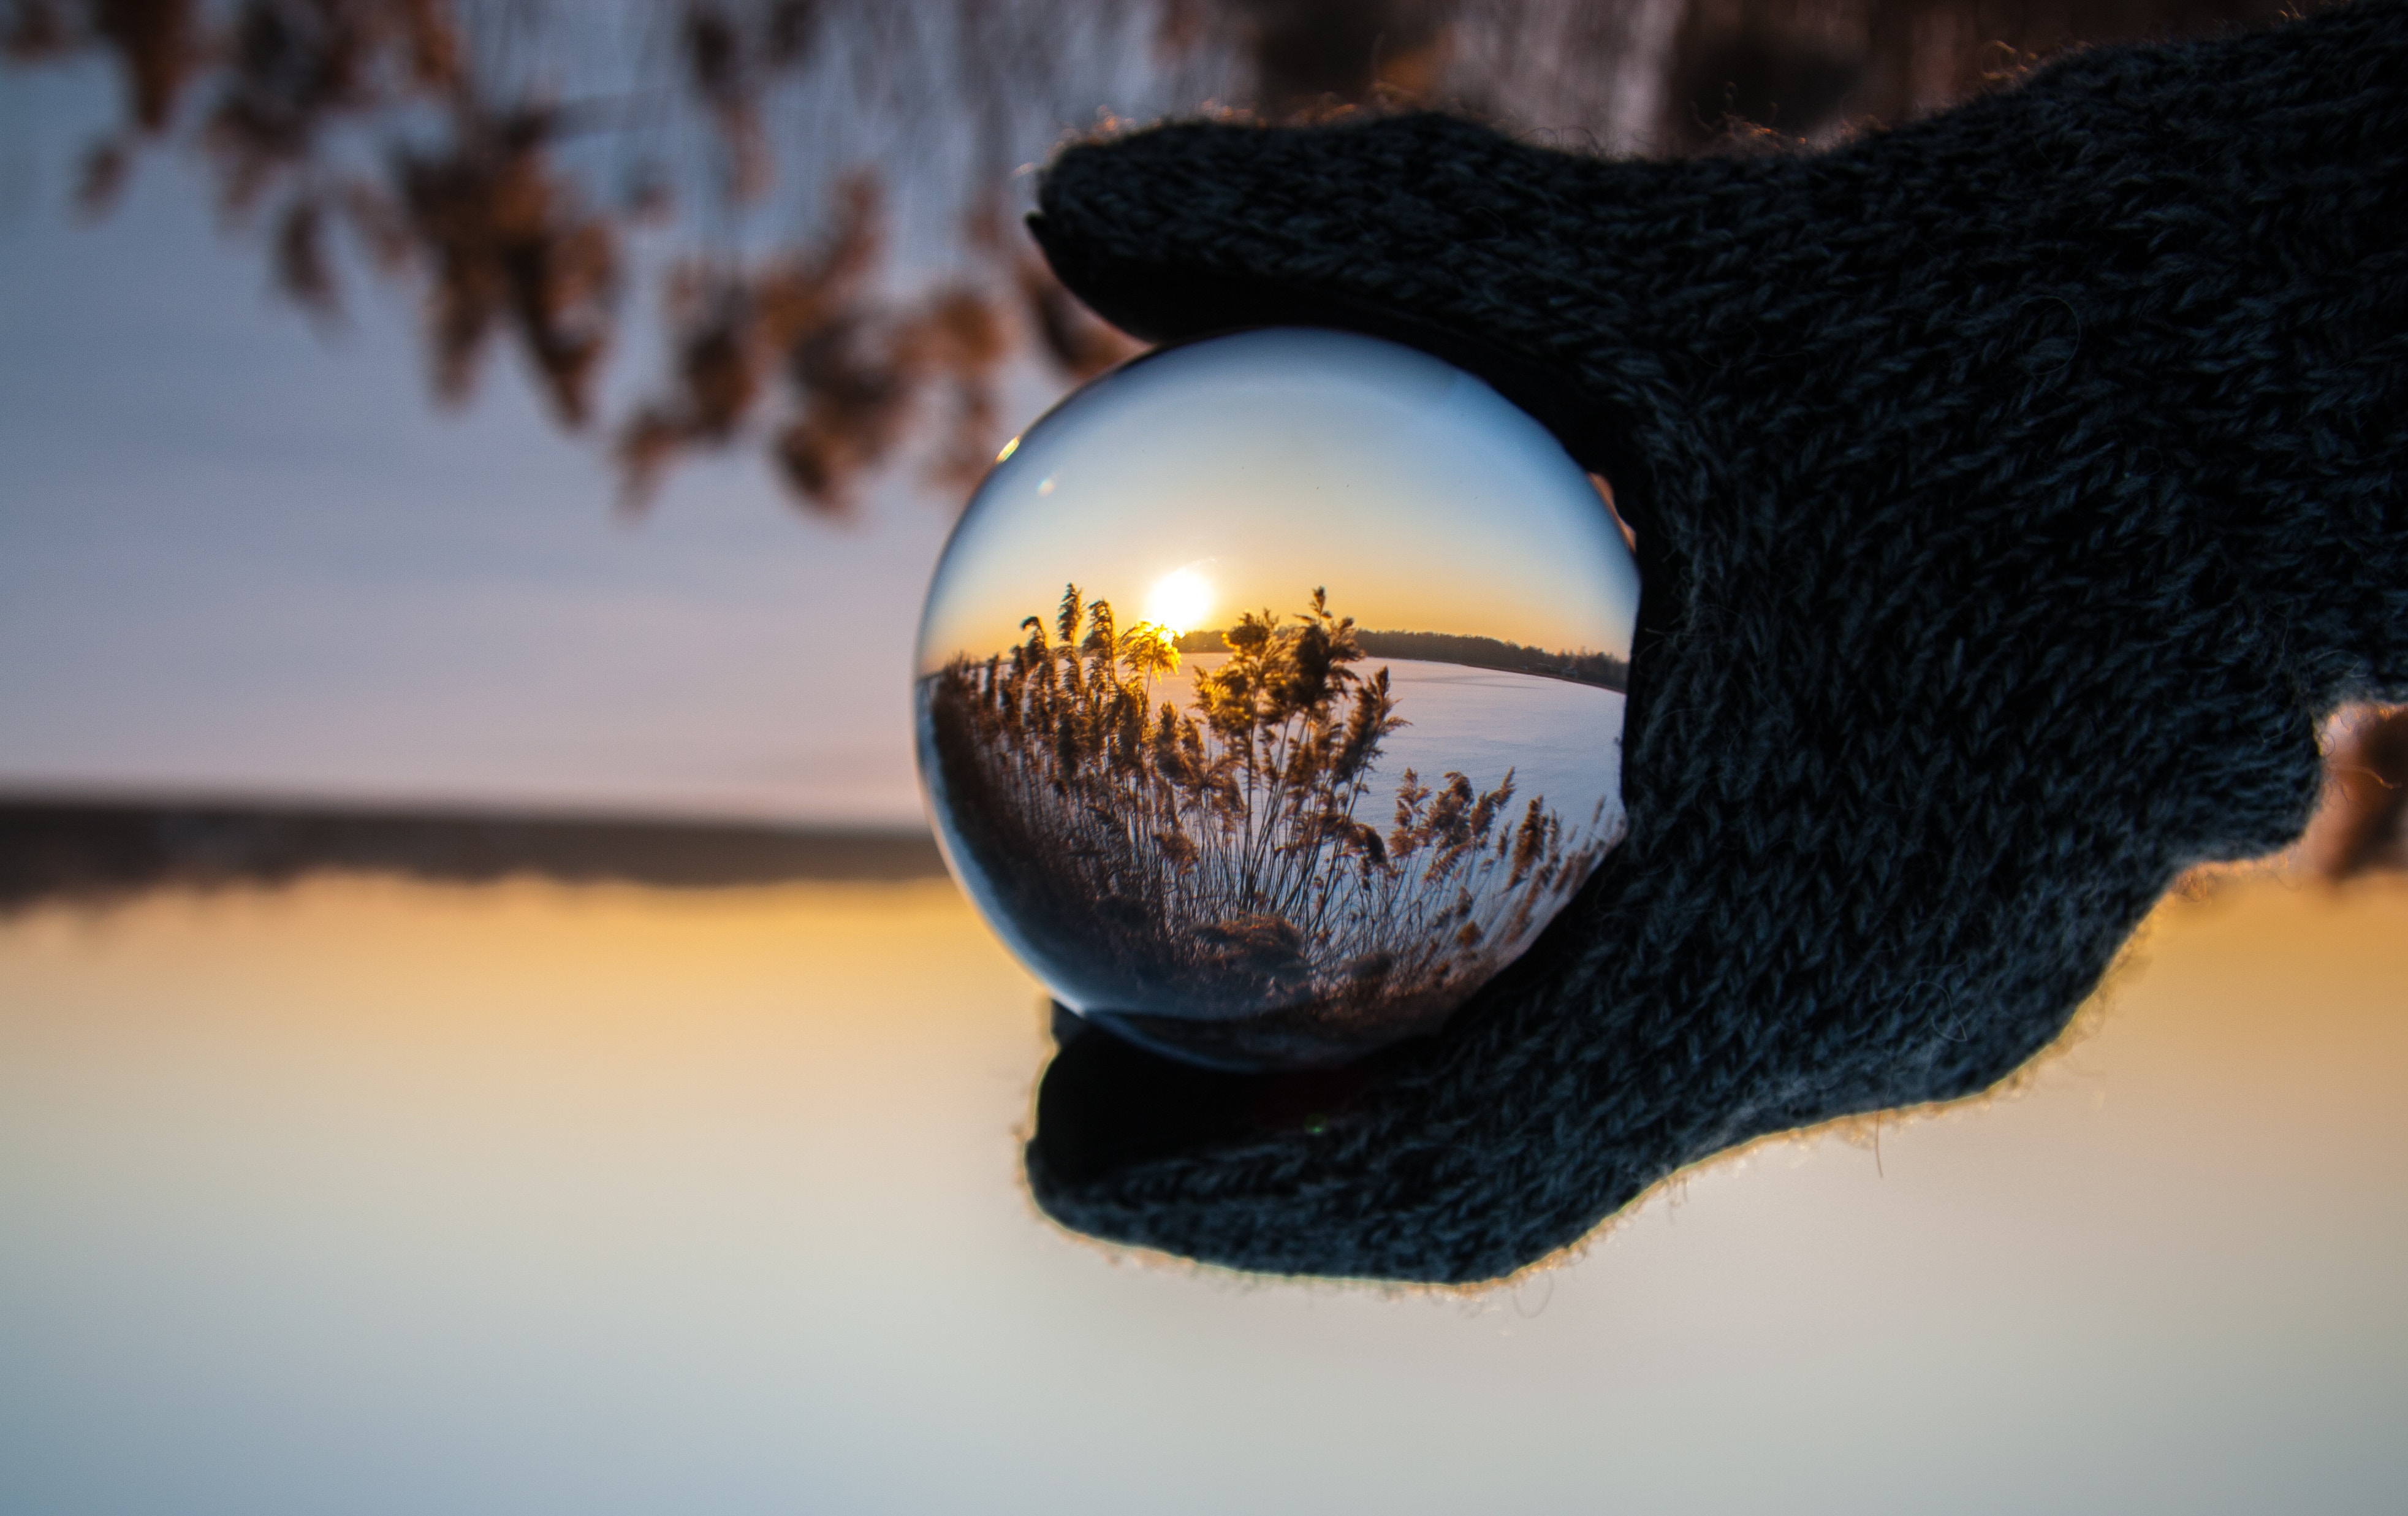 3929x2473 reed, cold, sunrise, mirror, evening, globe, Free image, sky, ball, riverbank, tree, hand, winter, morning, sunset, sun, holding, gloved, river, snow, glass Gallery HD Wallpaper